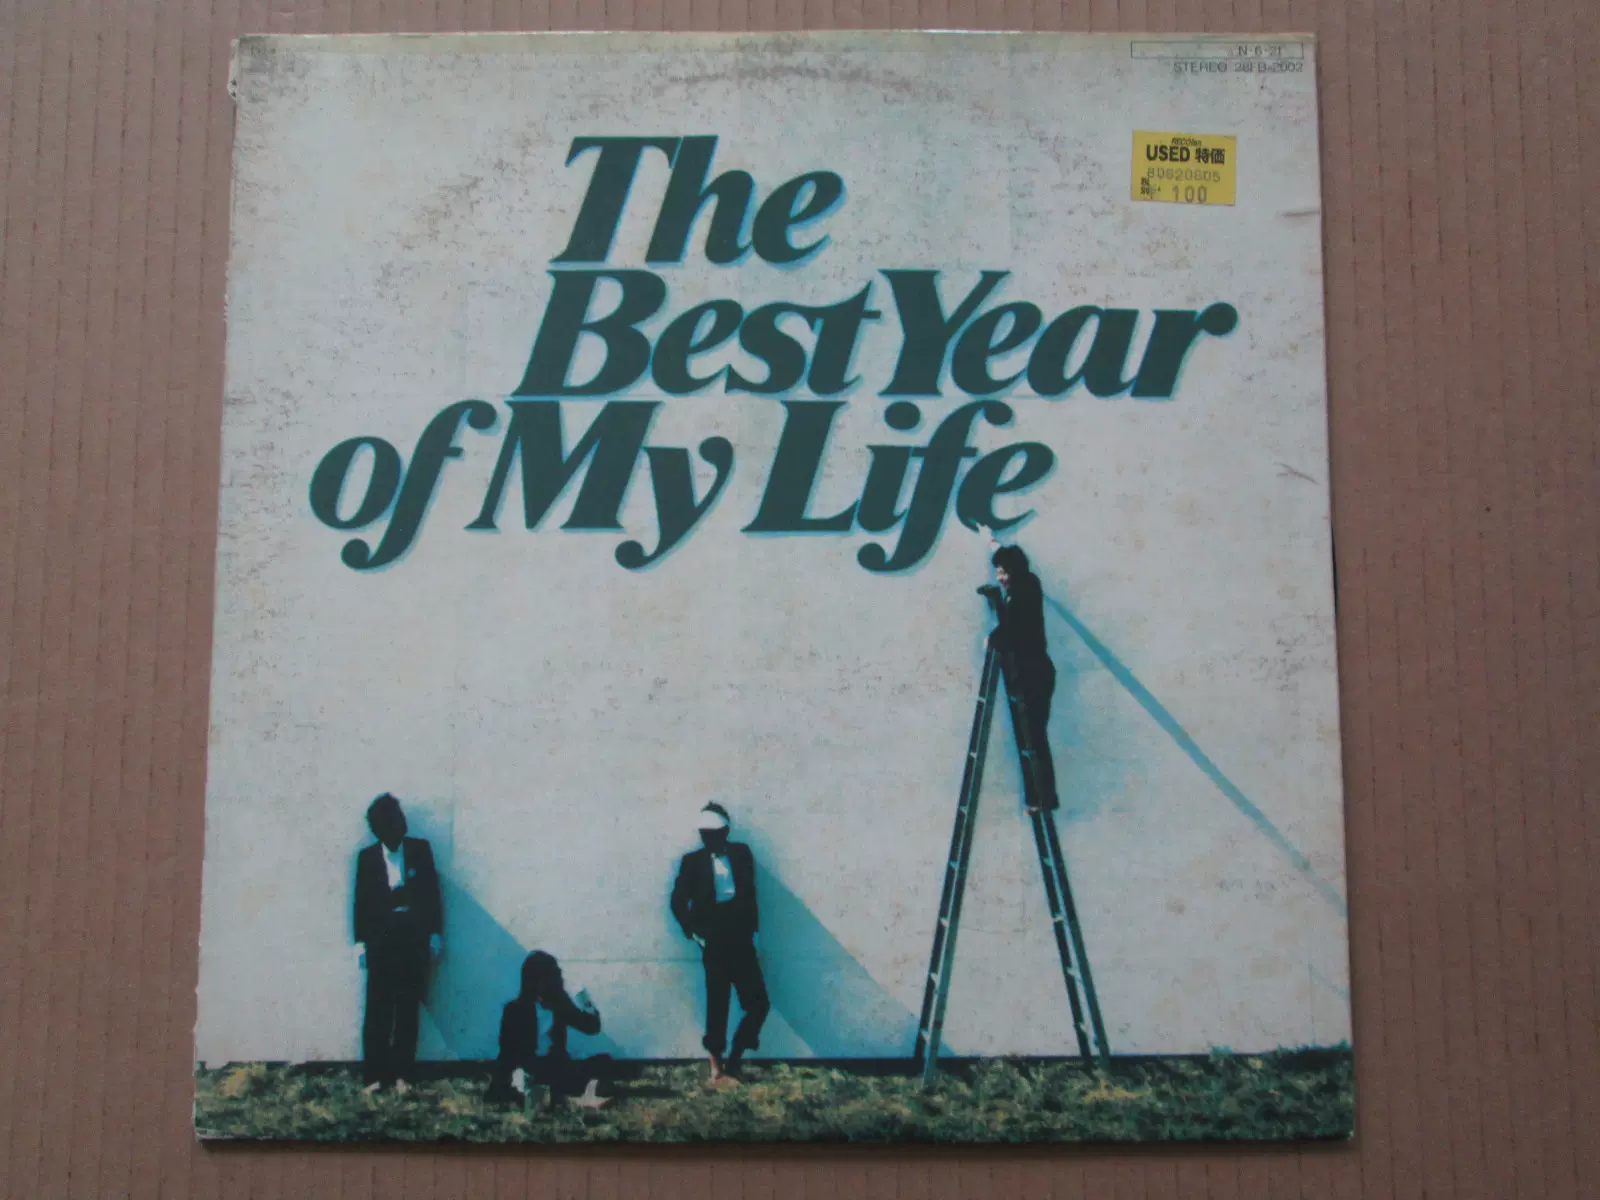 Off Course - The Best Year Of My Life 摇滚黑胶唱片LP